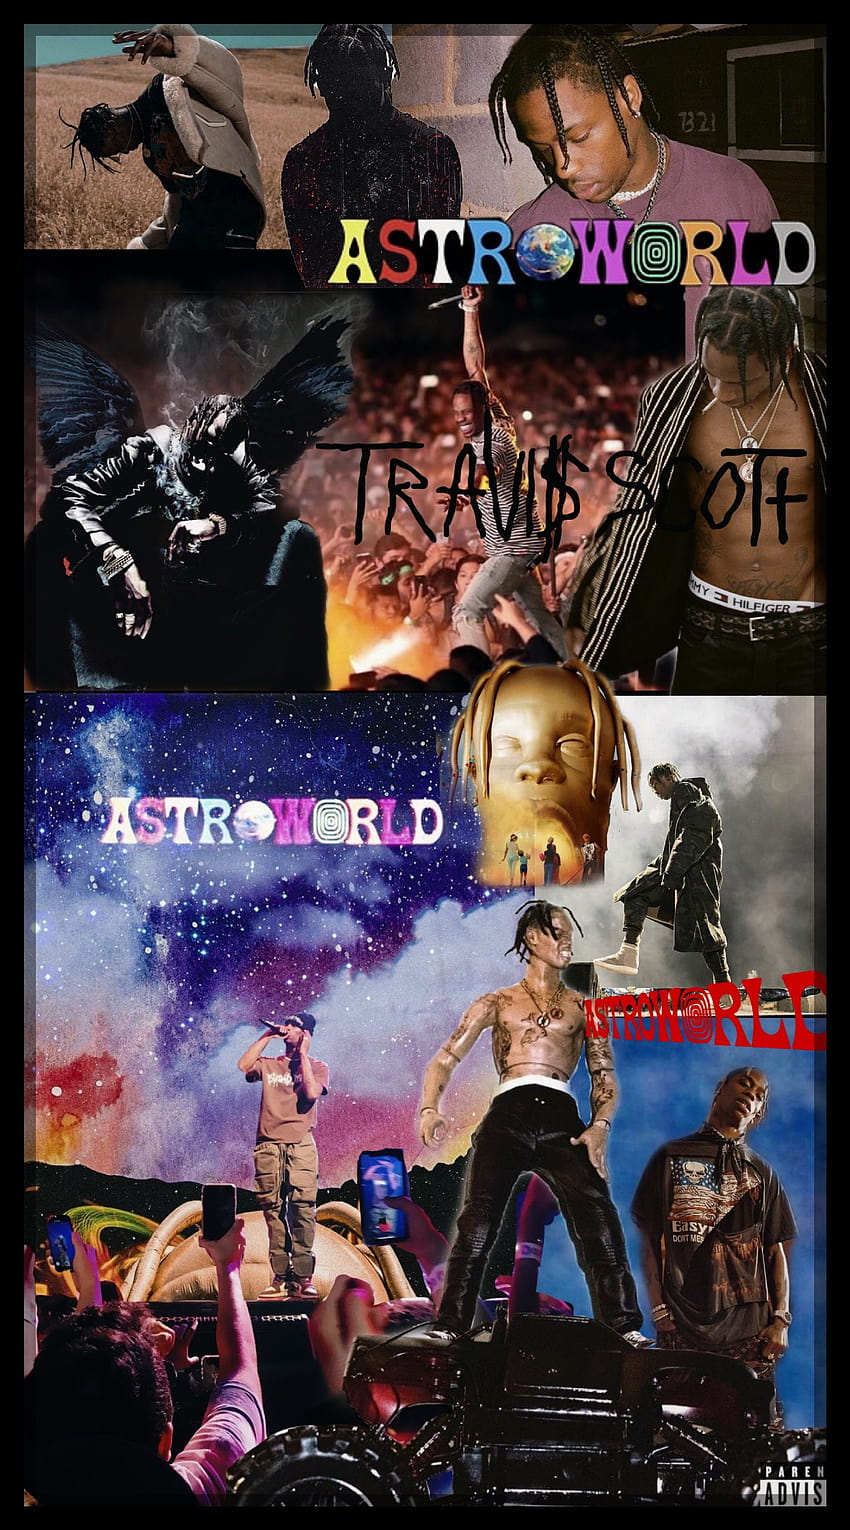 Astroworld collage I made for my phone. - Travis Scott